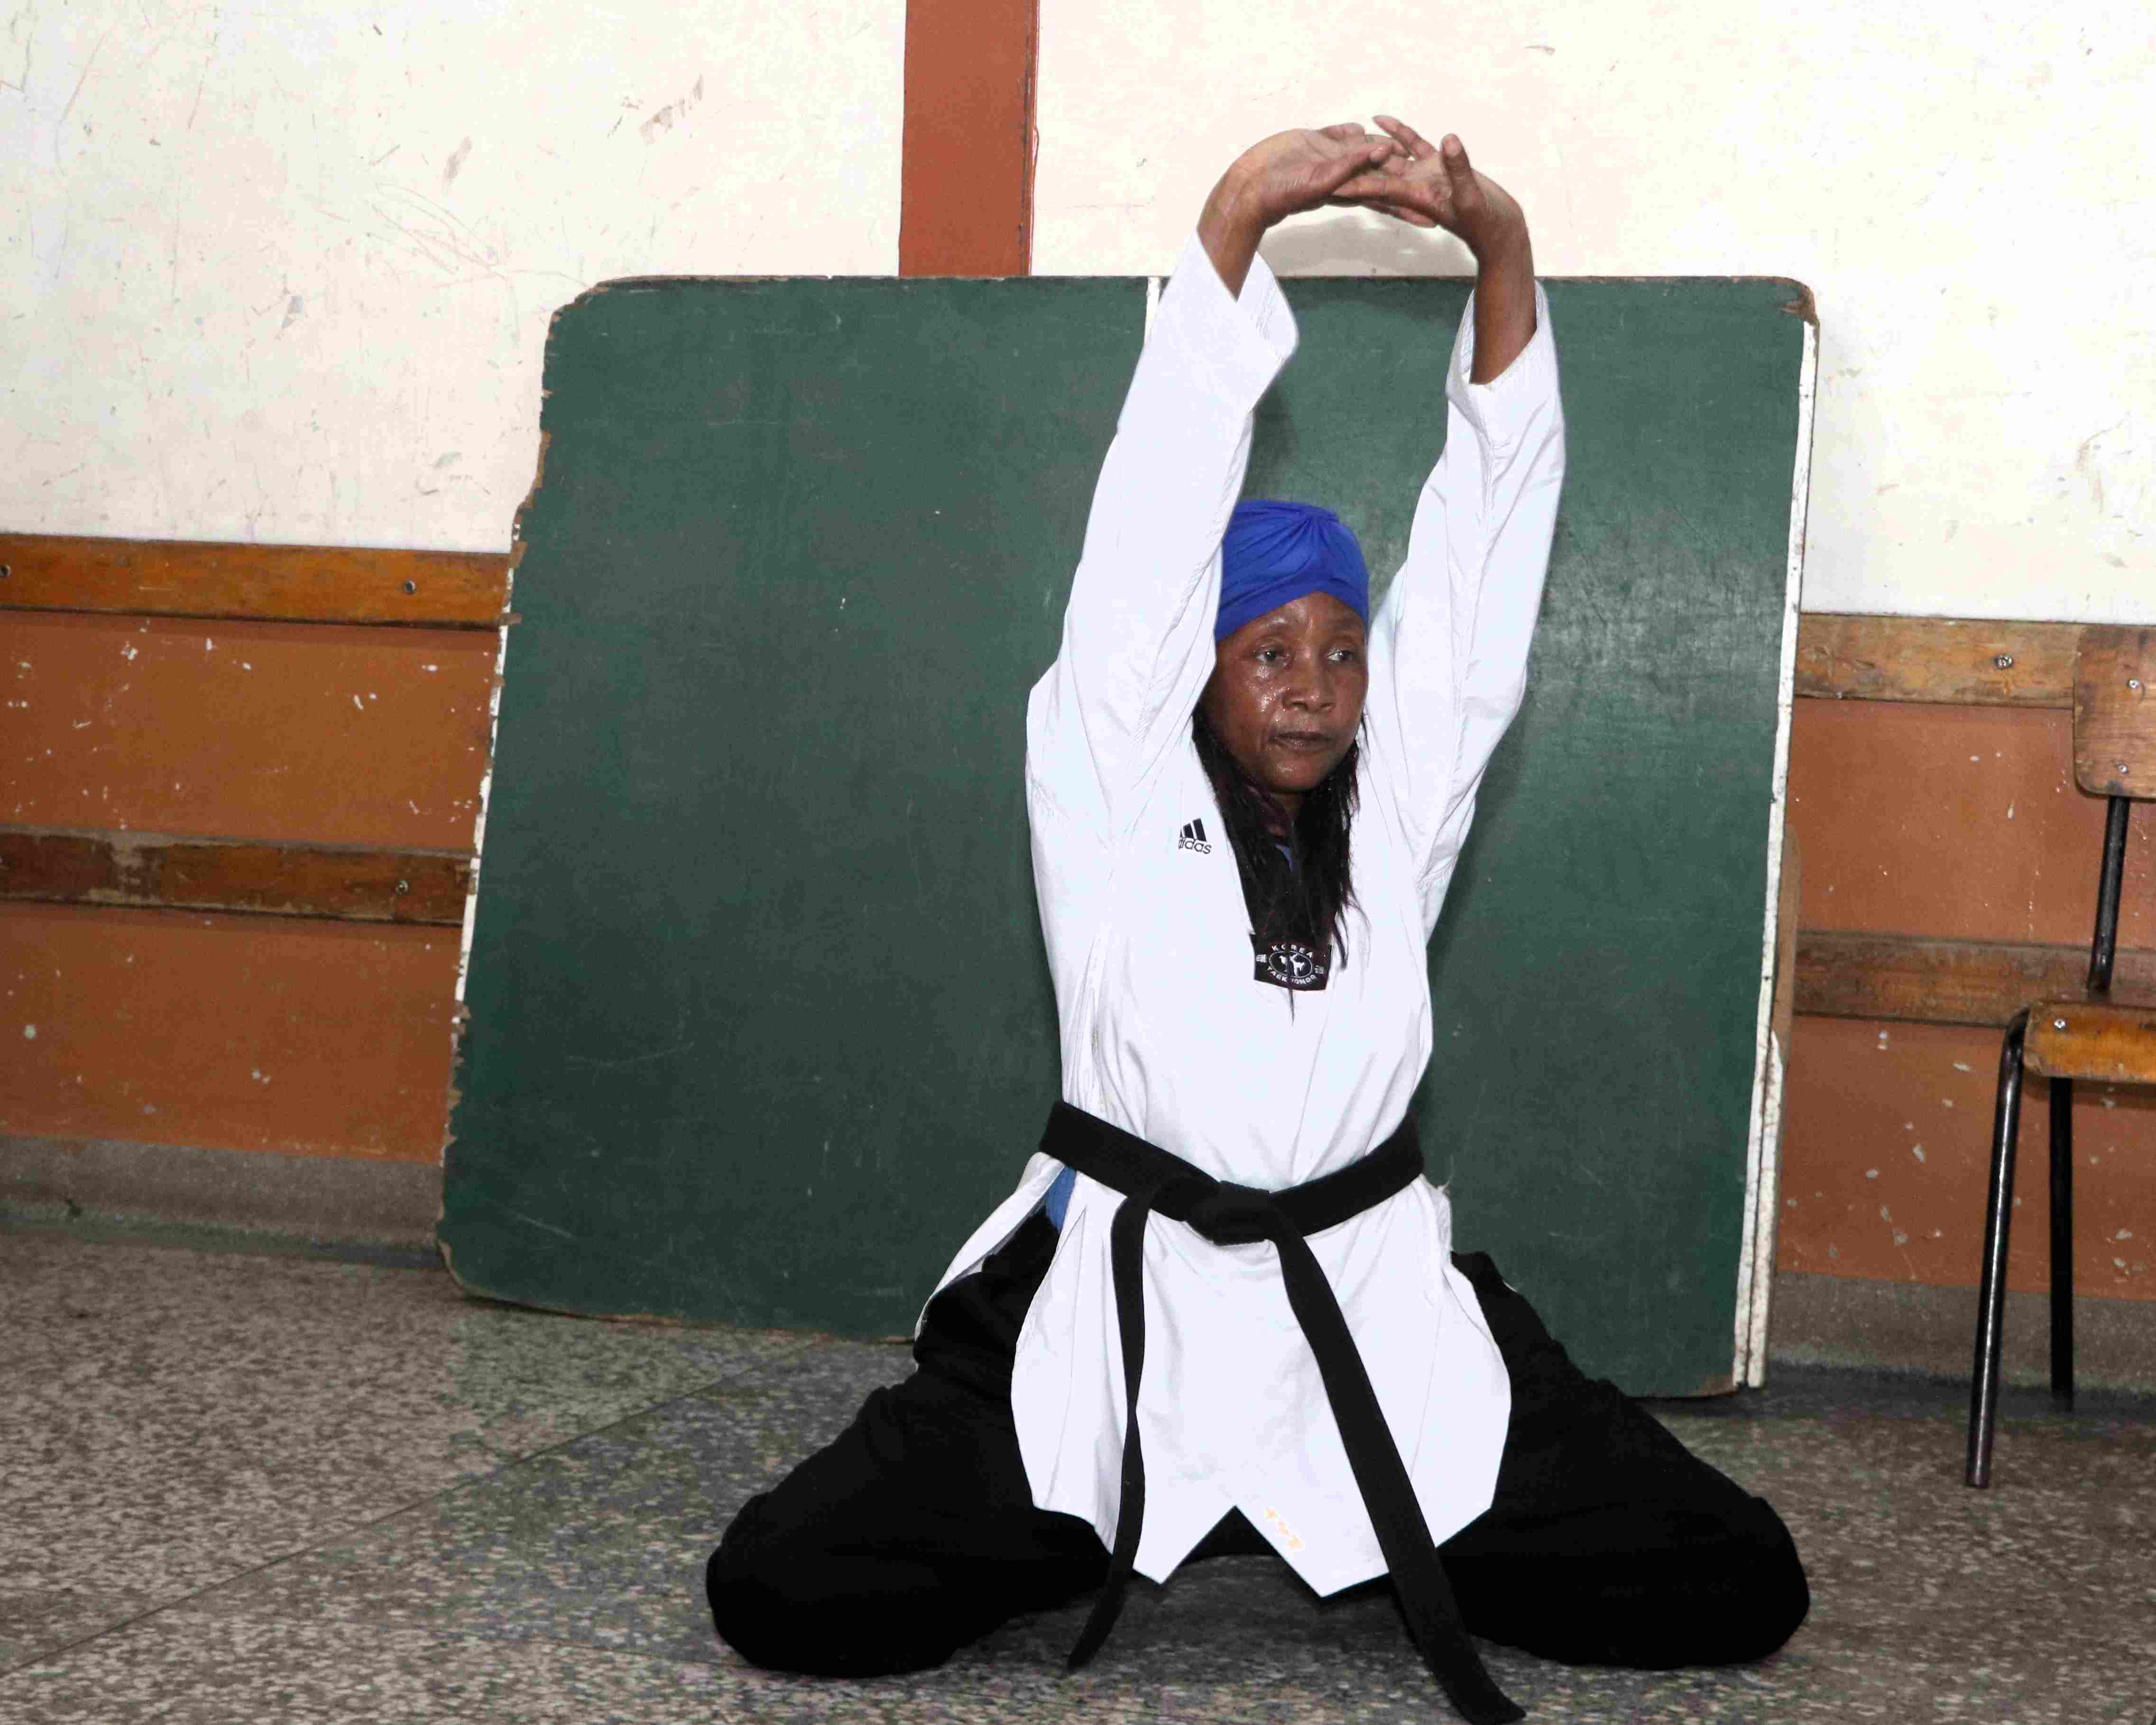 Featured image for Eastleigh female taekwondo coach empowers youth a kick at a time